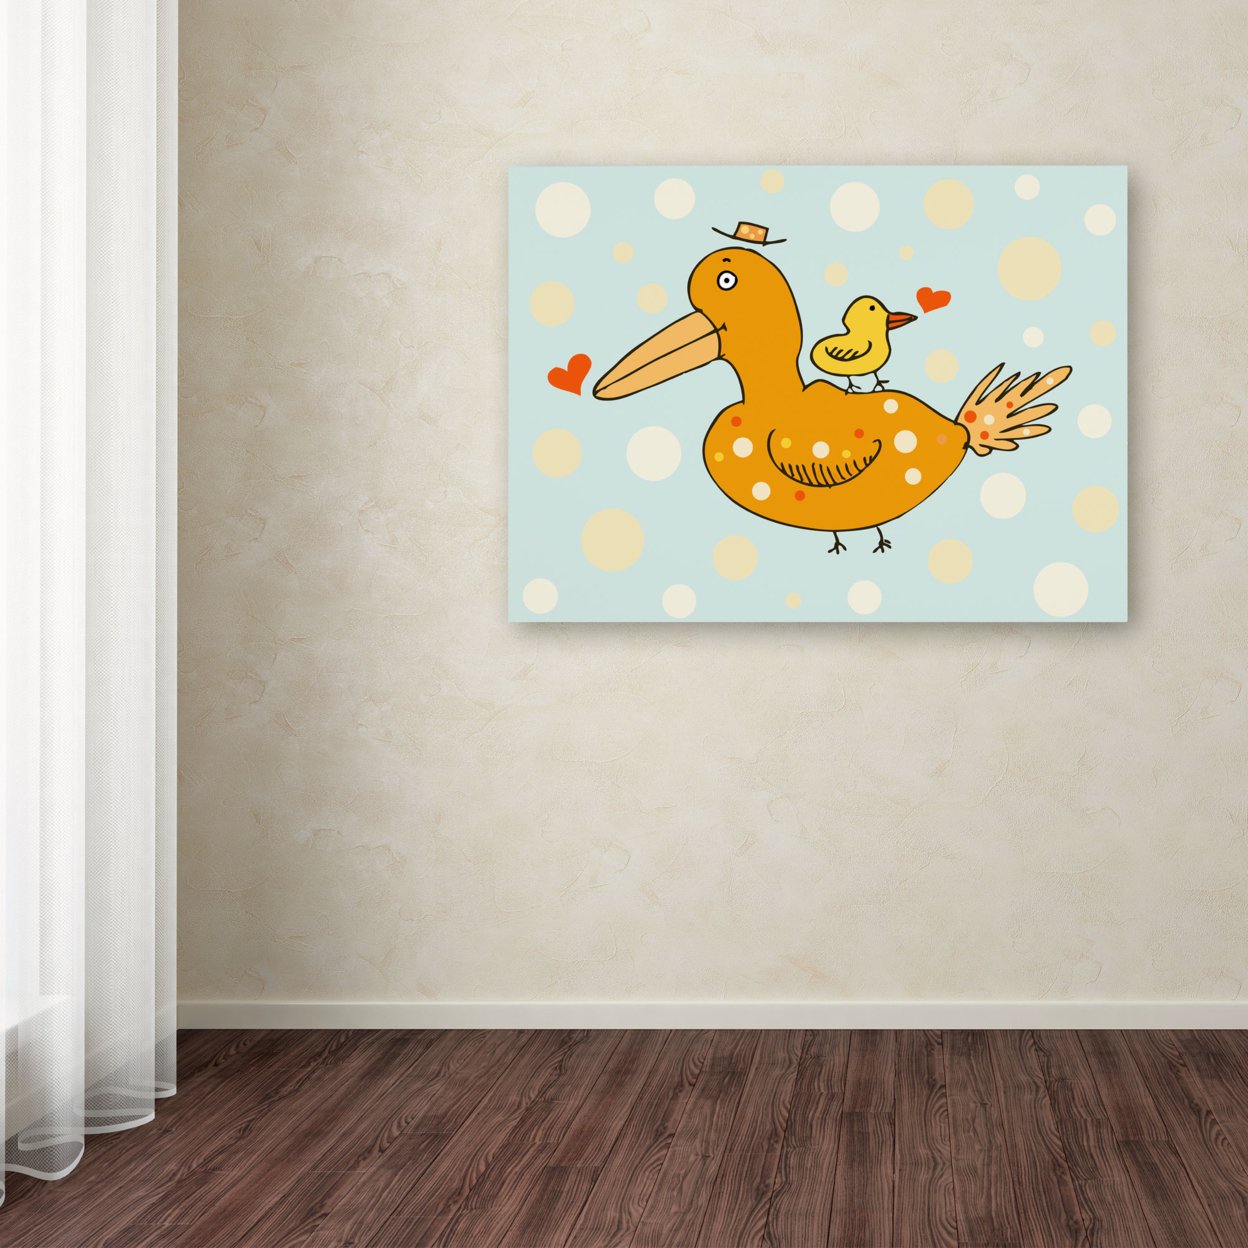 Carla Martell 'Bird And Baby' Canvas Wall Art 35 X 47 Inches